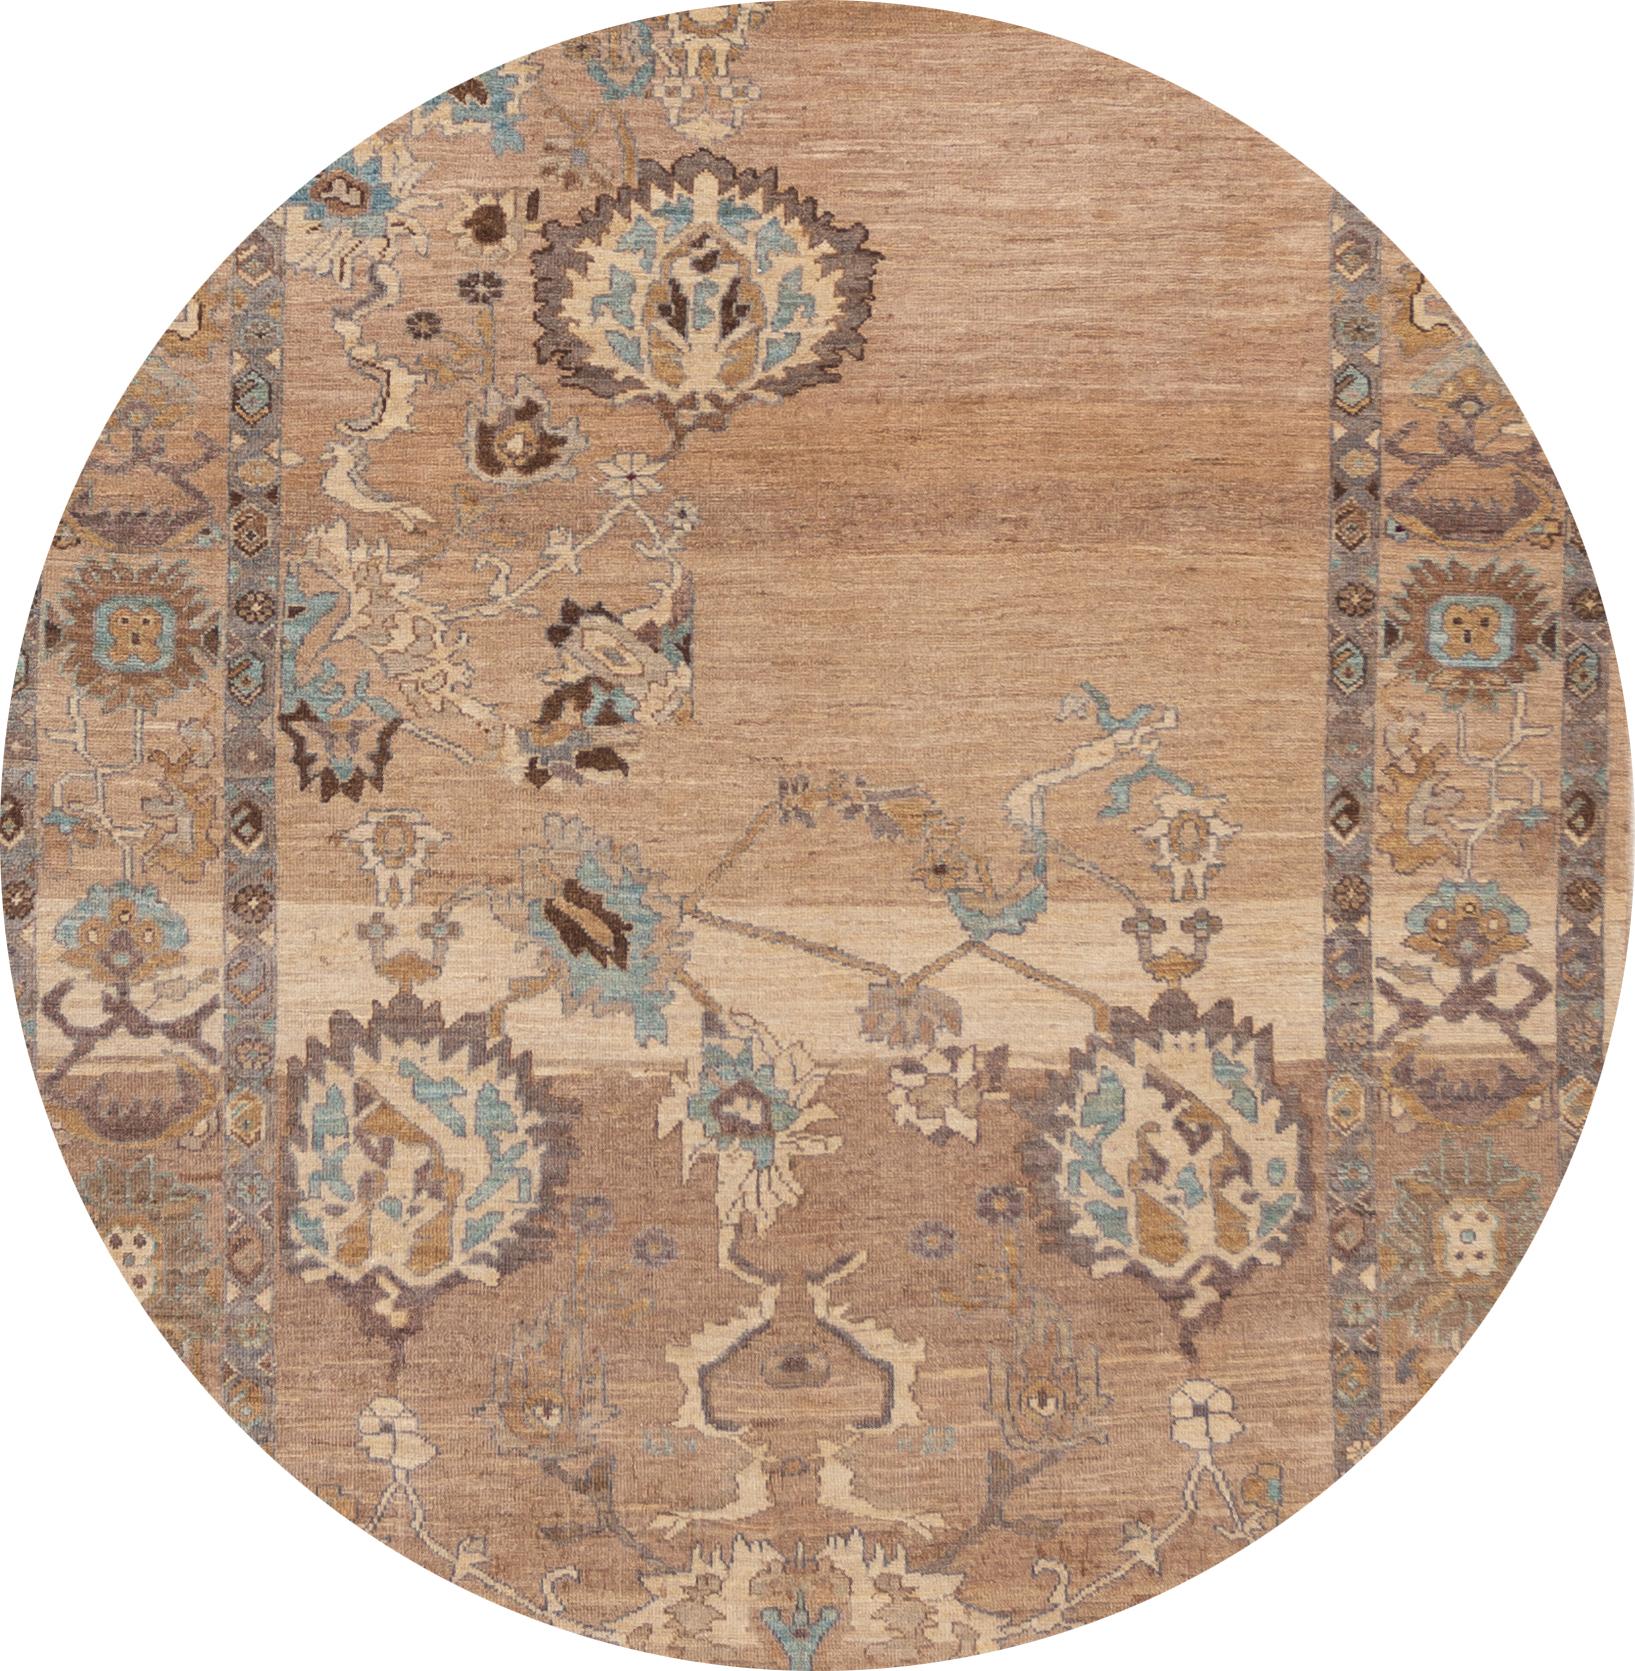 A hand knotted Sultanabad rug with a floral design and border on a brown field. Accents of beige, blue and dark brown throughout. 

This rug measures 6'9